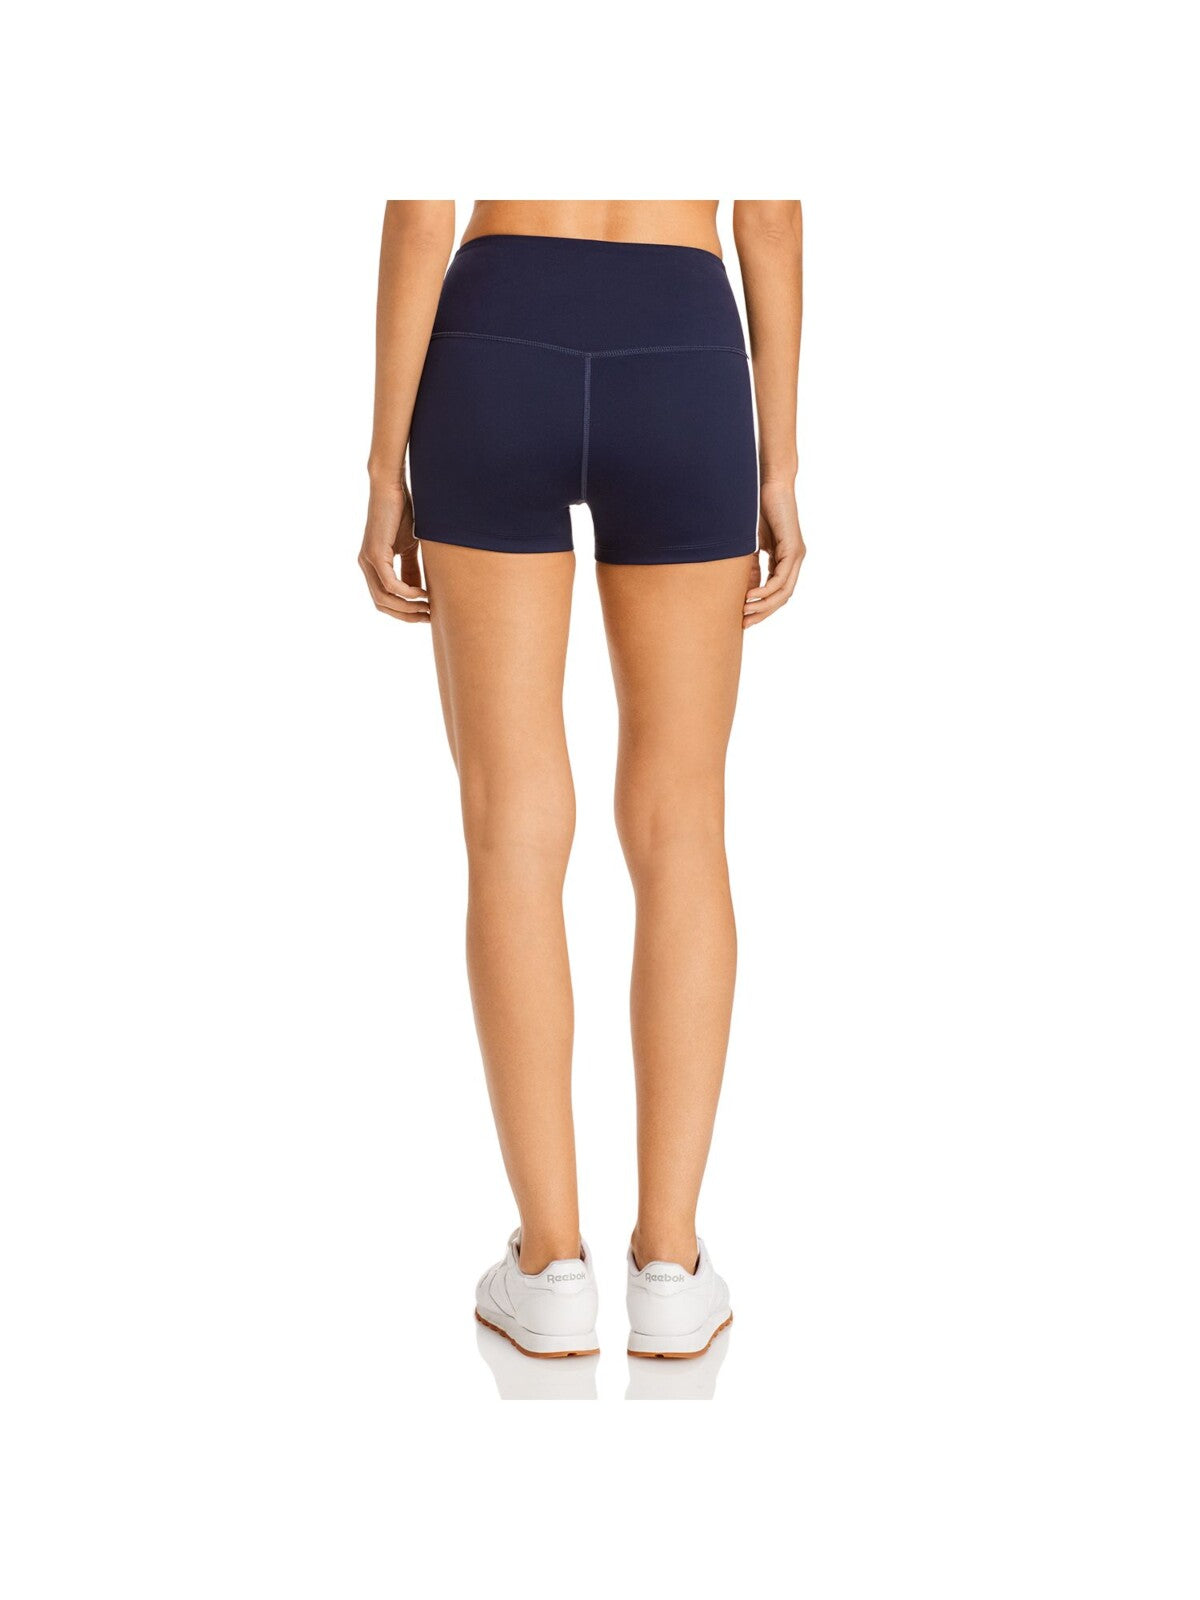 SPLITS 59 Womens Navy Stretch Fitted Regular Rise Shorts L